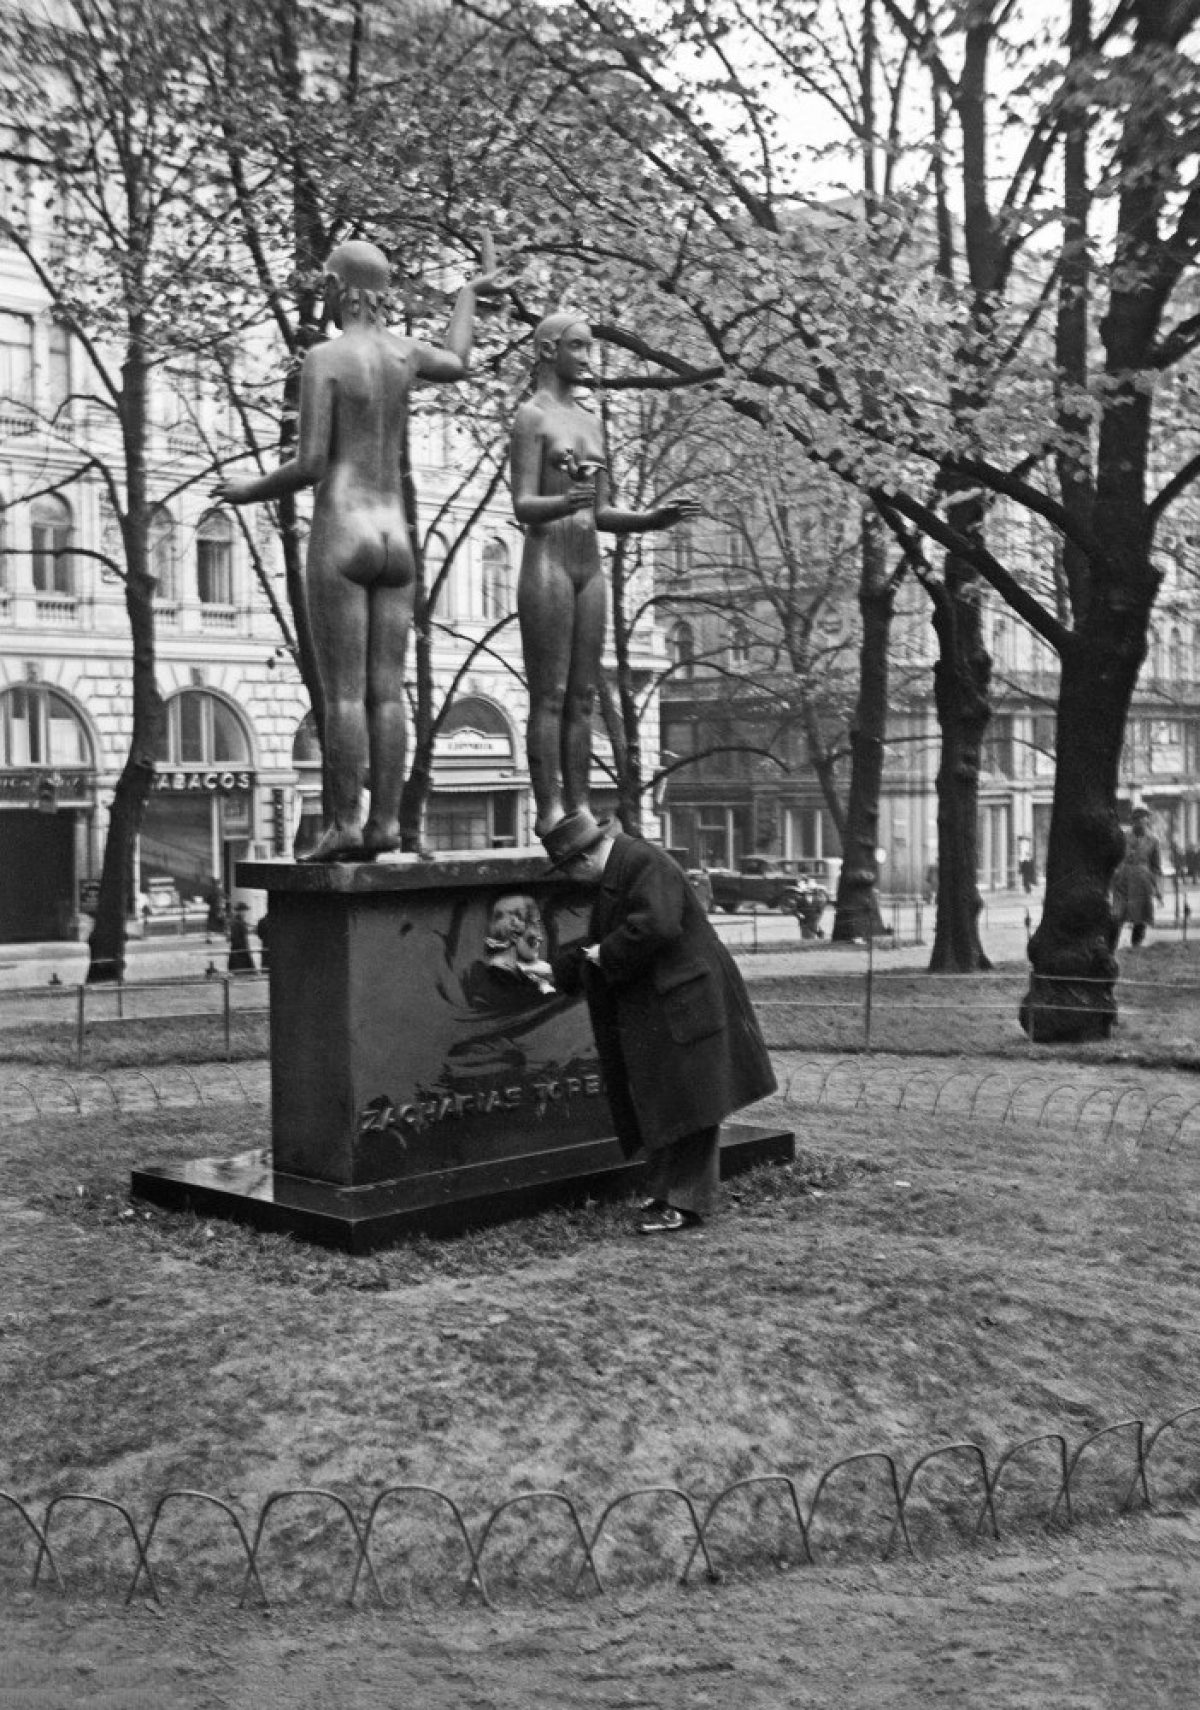 Gunnar Finne cleaning the medallion portrait of Topelius on the monument Fact and Fable before the ceremony at the Esplanadi park in Helsinki on 12 October 1932. Topelius’s name and portrait were added to the pedestal. Photo: Hugo Sundström